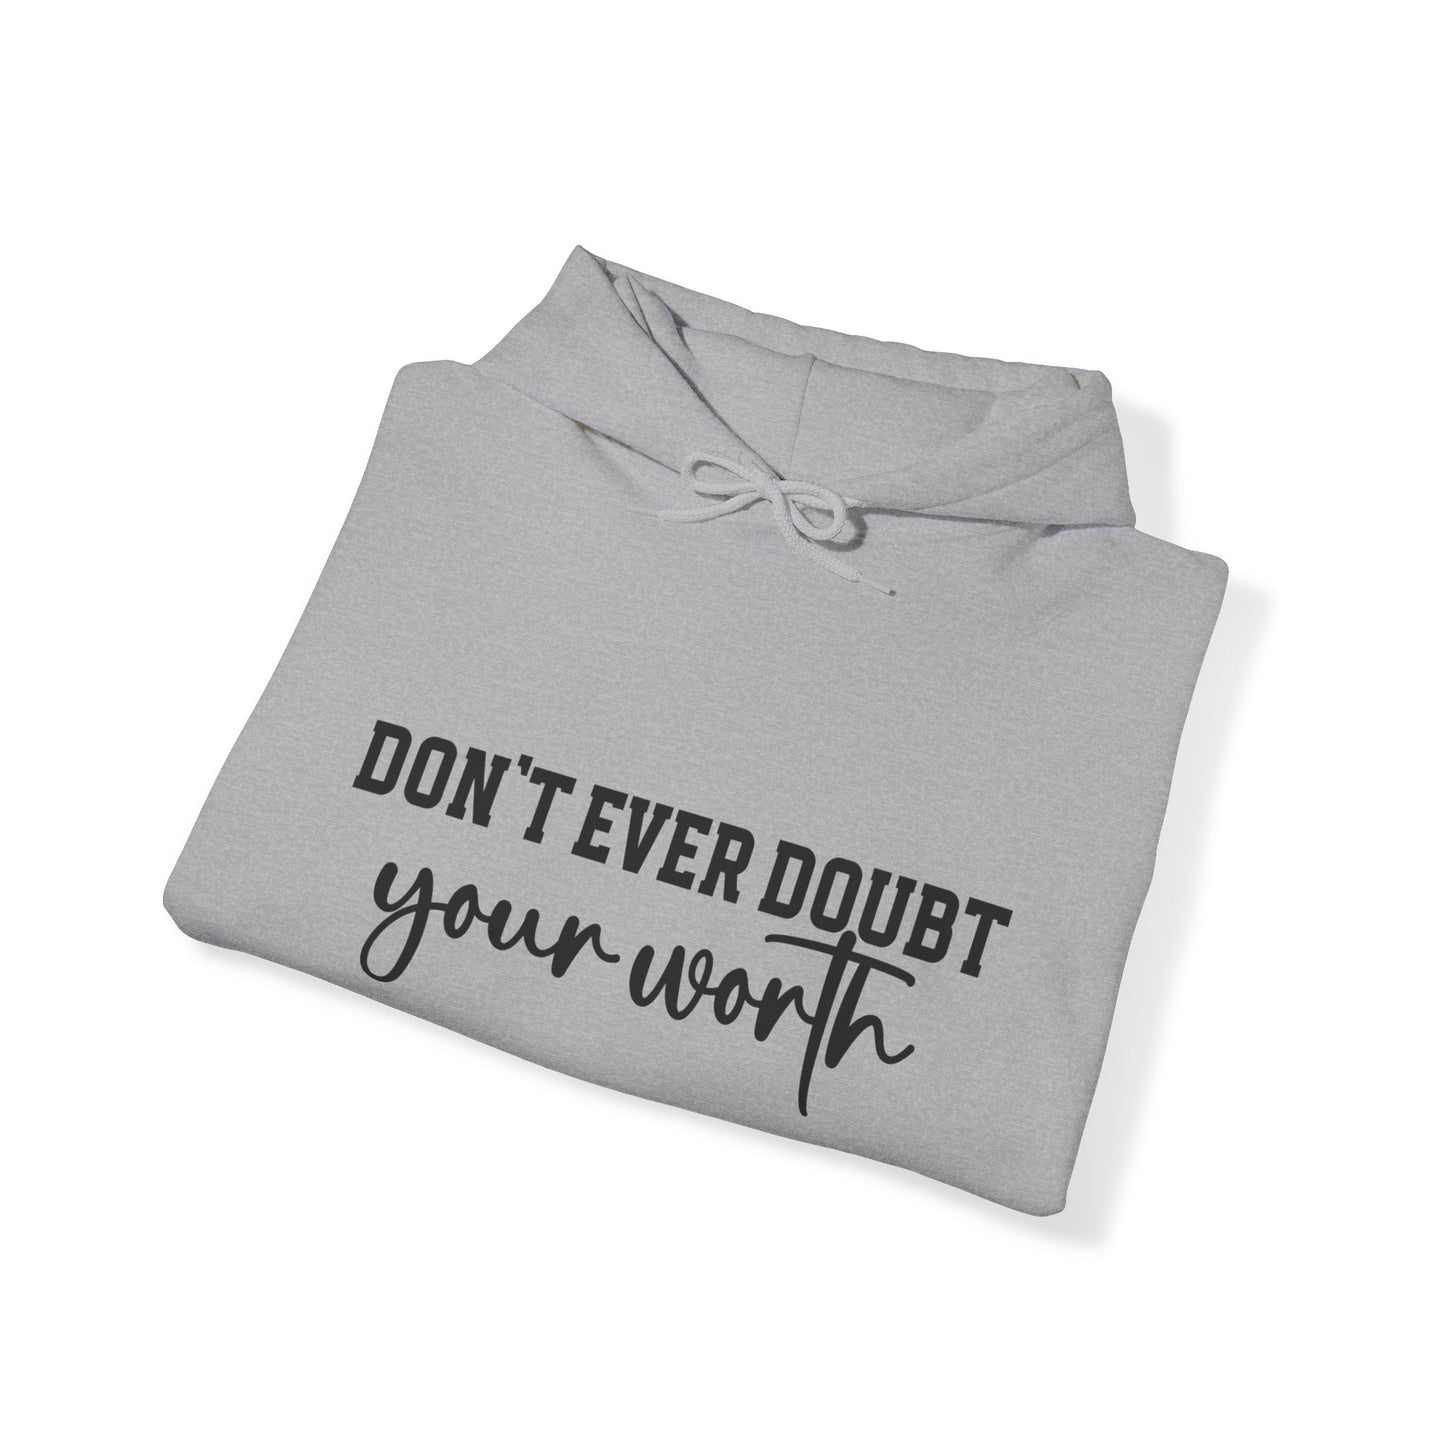 Don't Ever Doubt Your Worth Hoodie